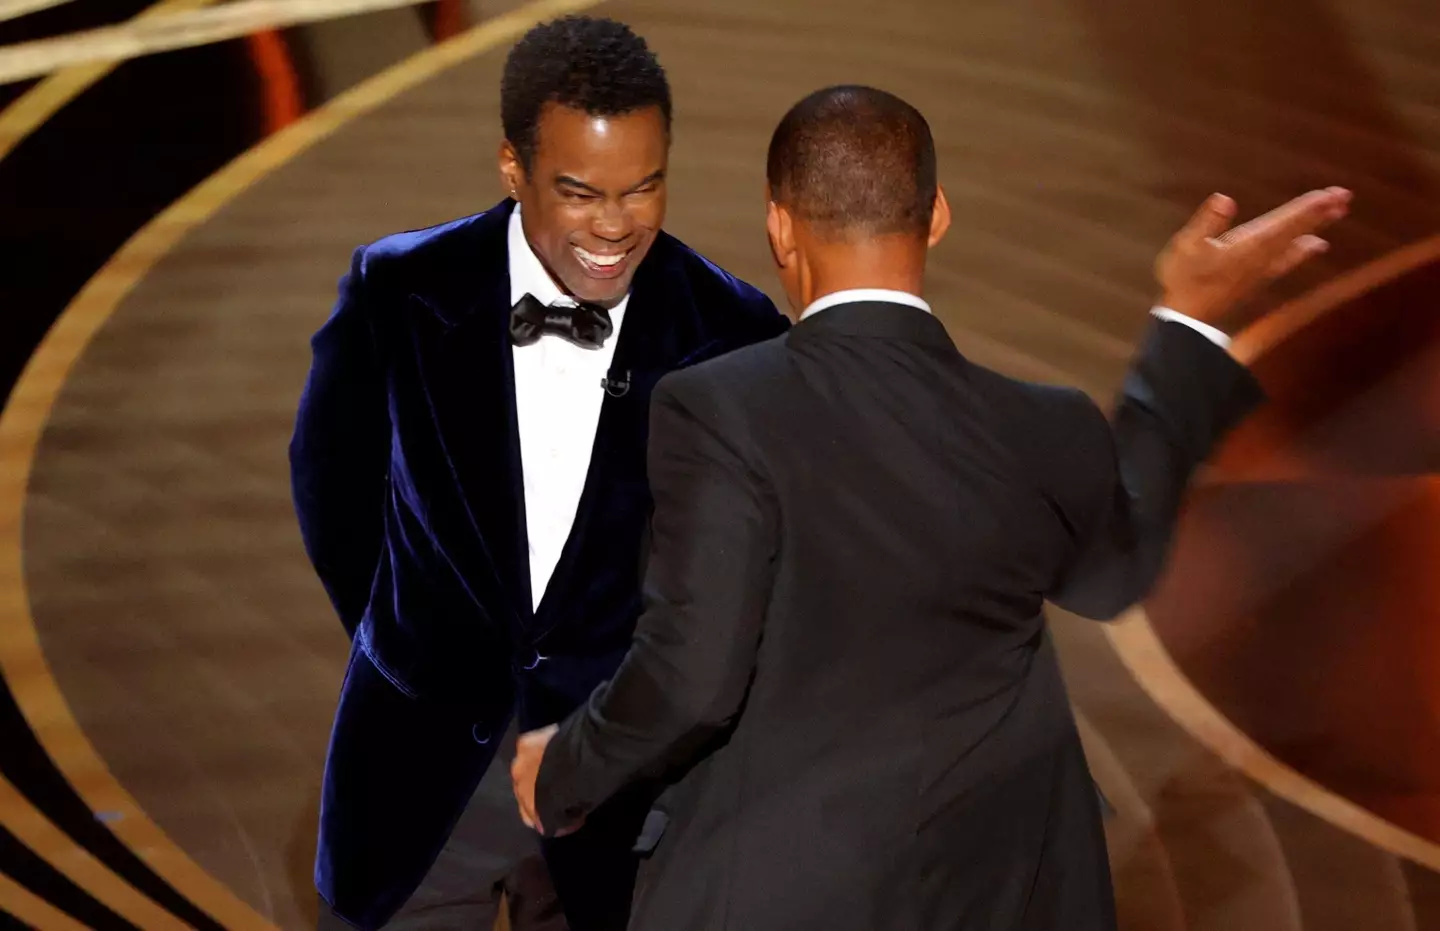 Will Smith slapped Chris Rock on stage during the 94th Academy Awards.